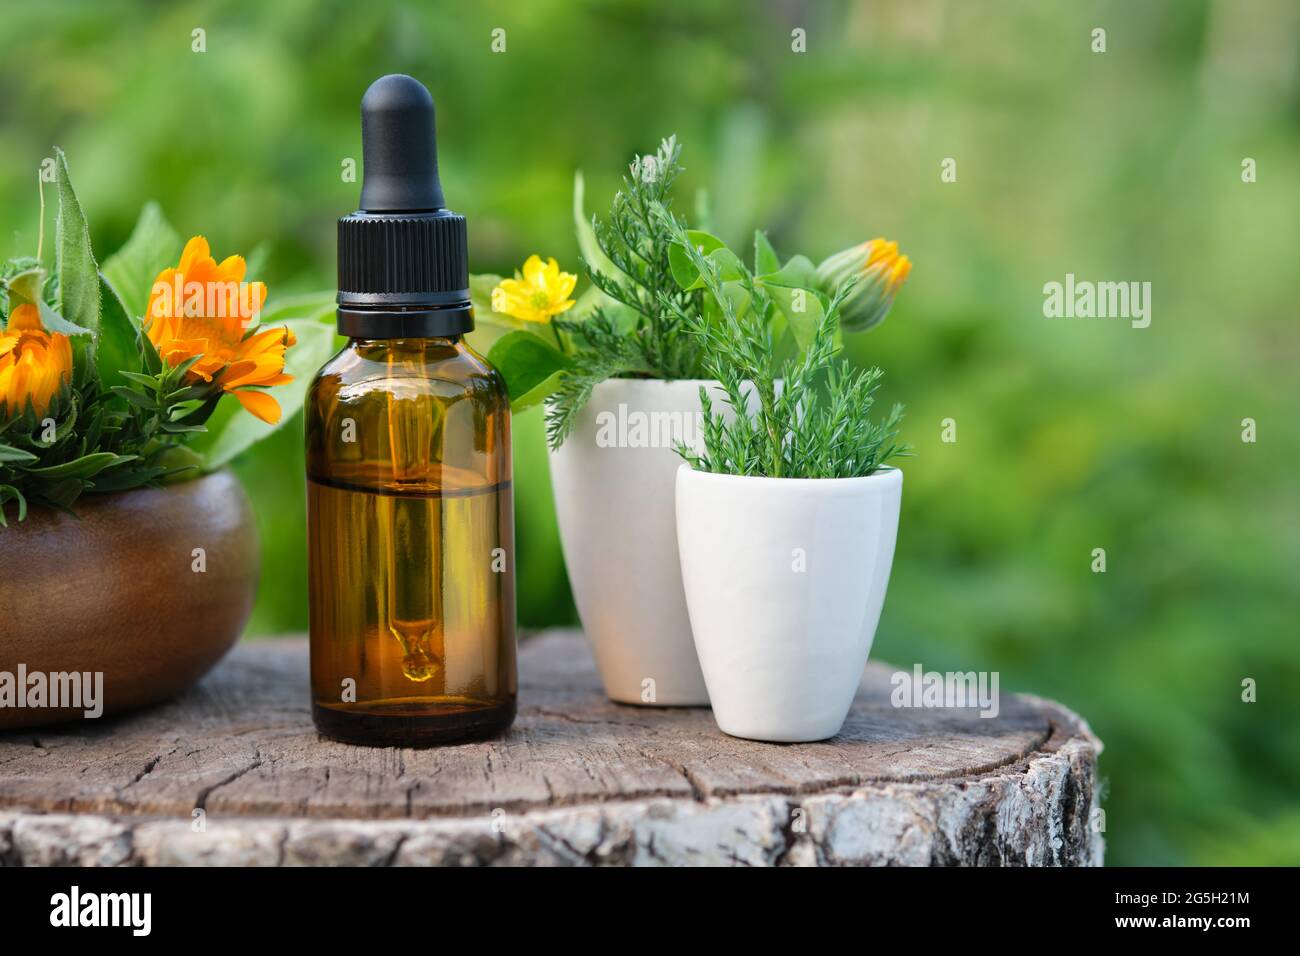 Dropper bottle of calendula essential oil, infusion or serum, healthy marigold flowers and juniper twigs in mortars outdoors. Alternative medicine. Stock Photo